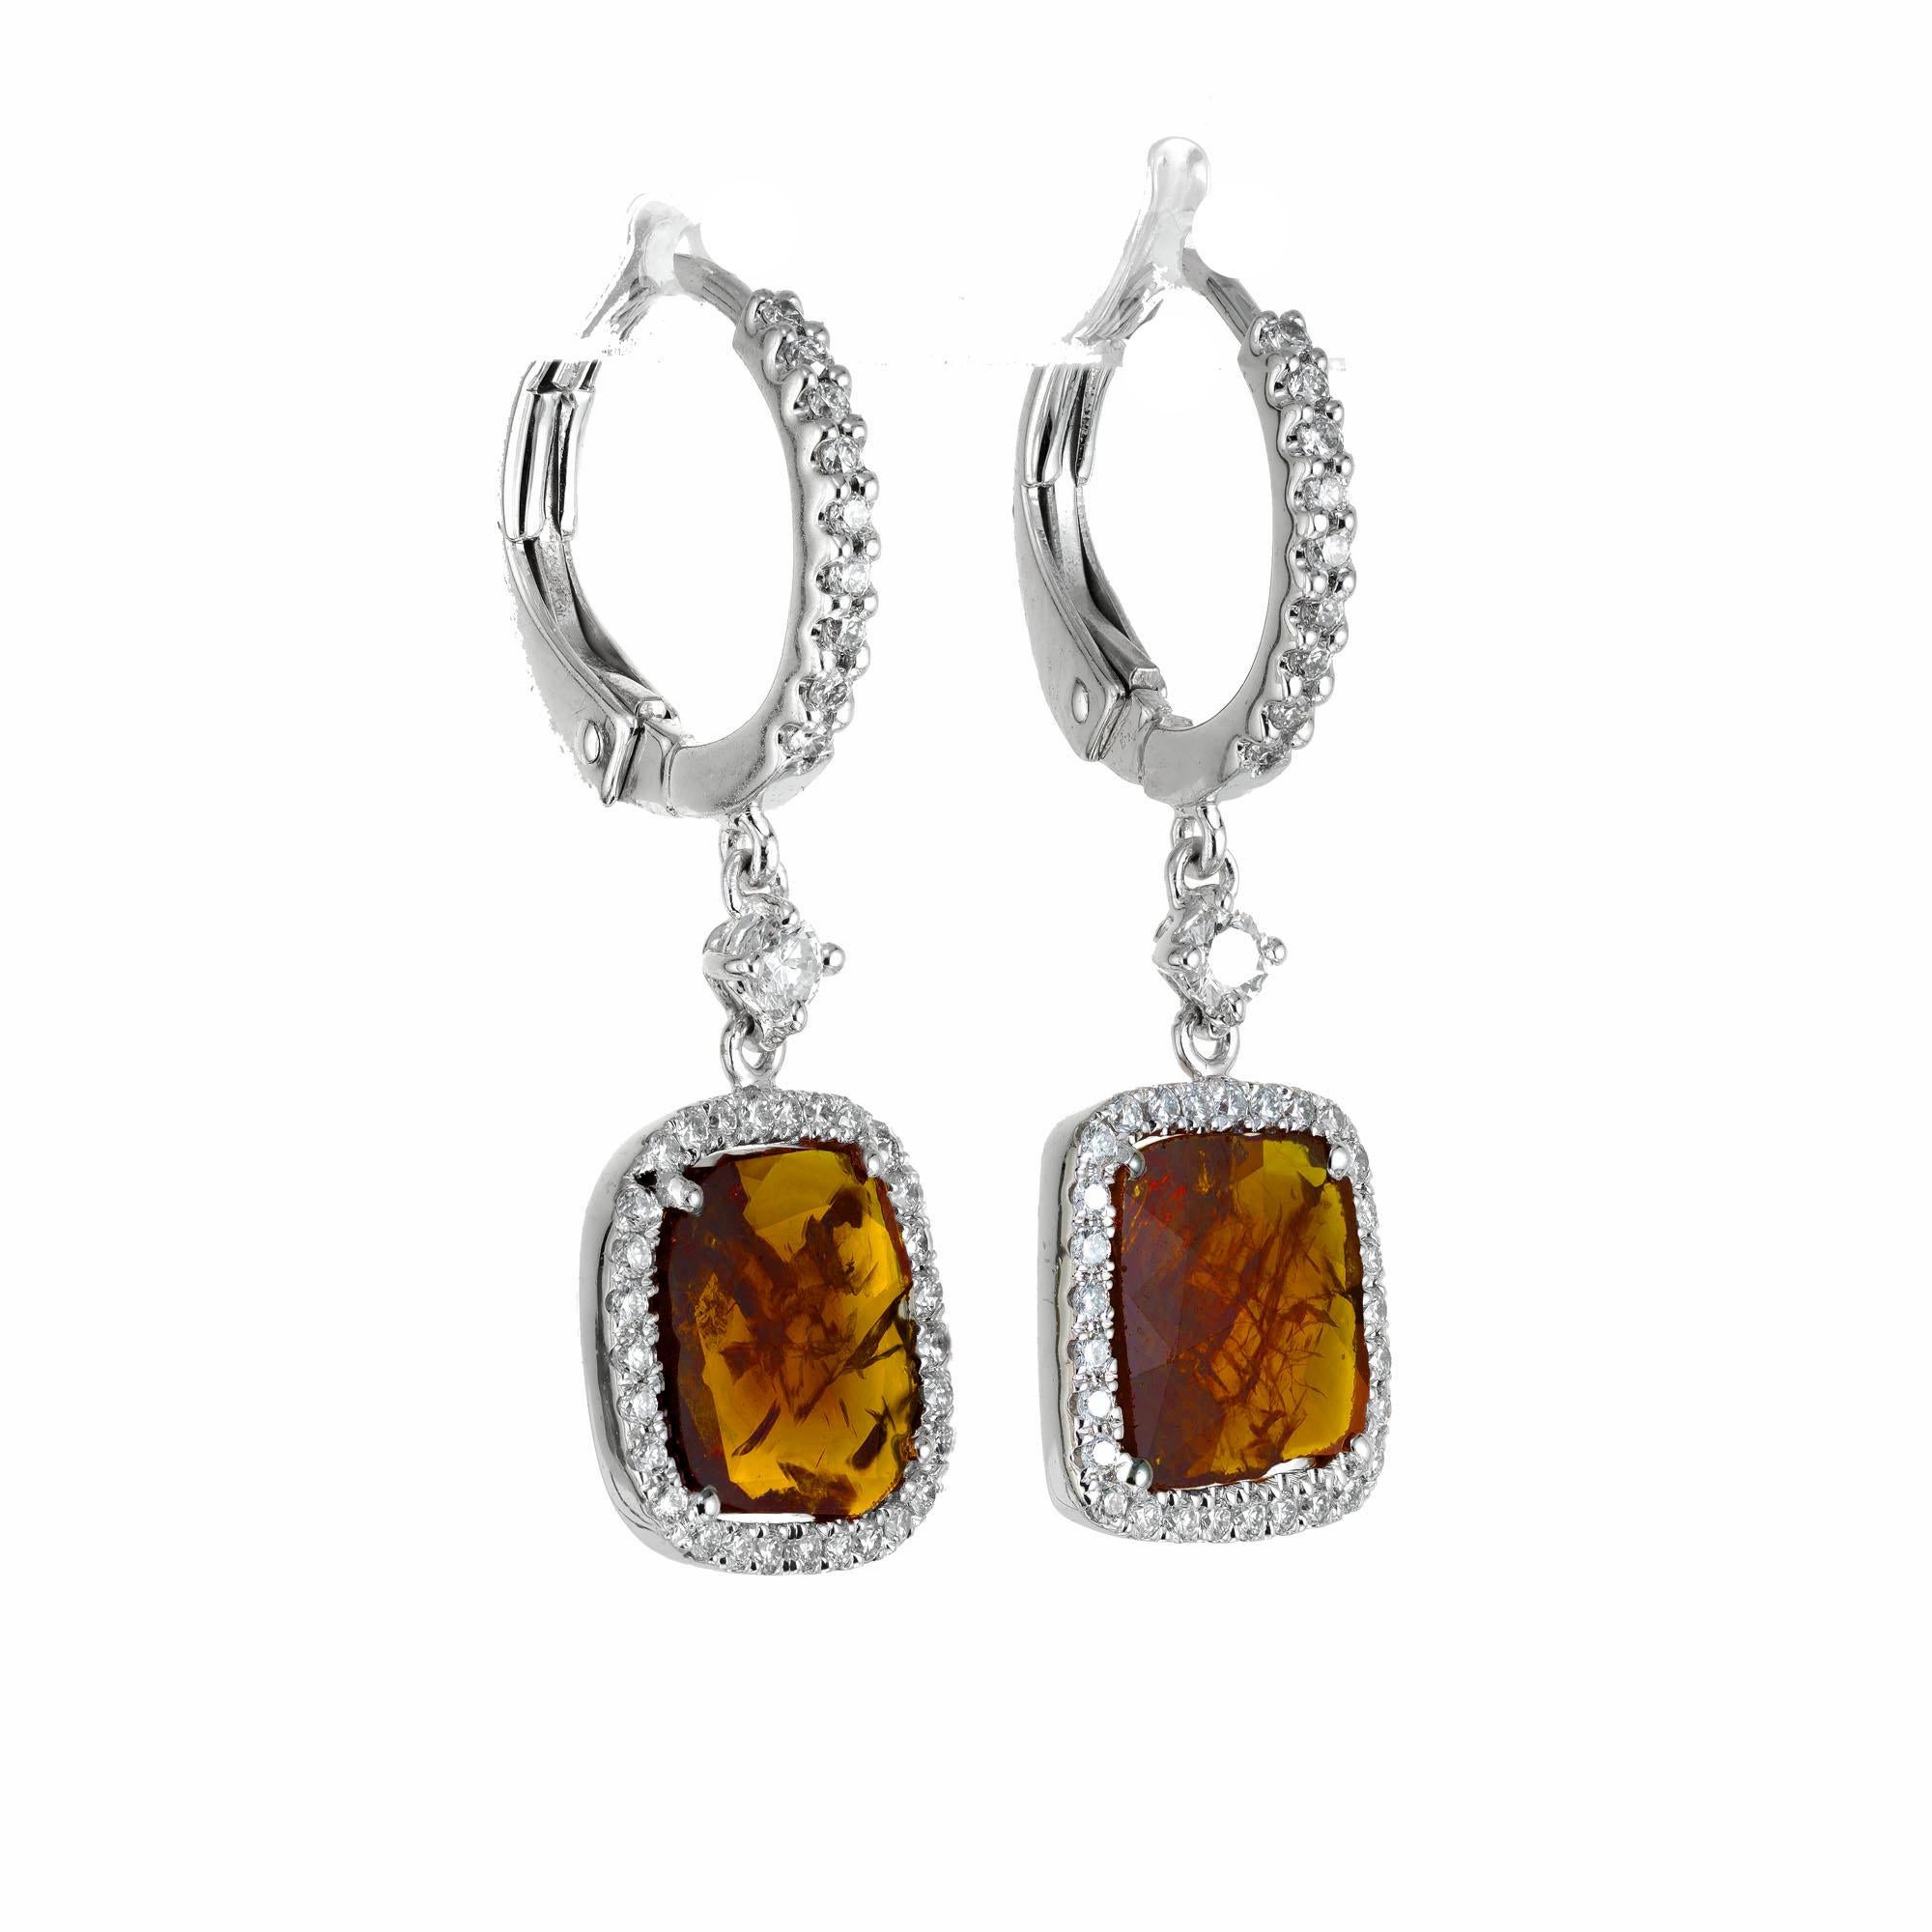 Natural citrine and diamond dangle earrings. 2 brown, yellow and orange cushion cut citrines with a halo of 78 round diamonds. 14k white gold lever back settings. 

2 orange yellow natural Citrine approx. total weight 2.48cts, natural inclusions
78